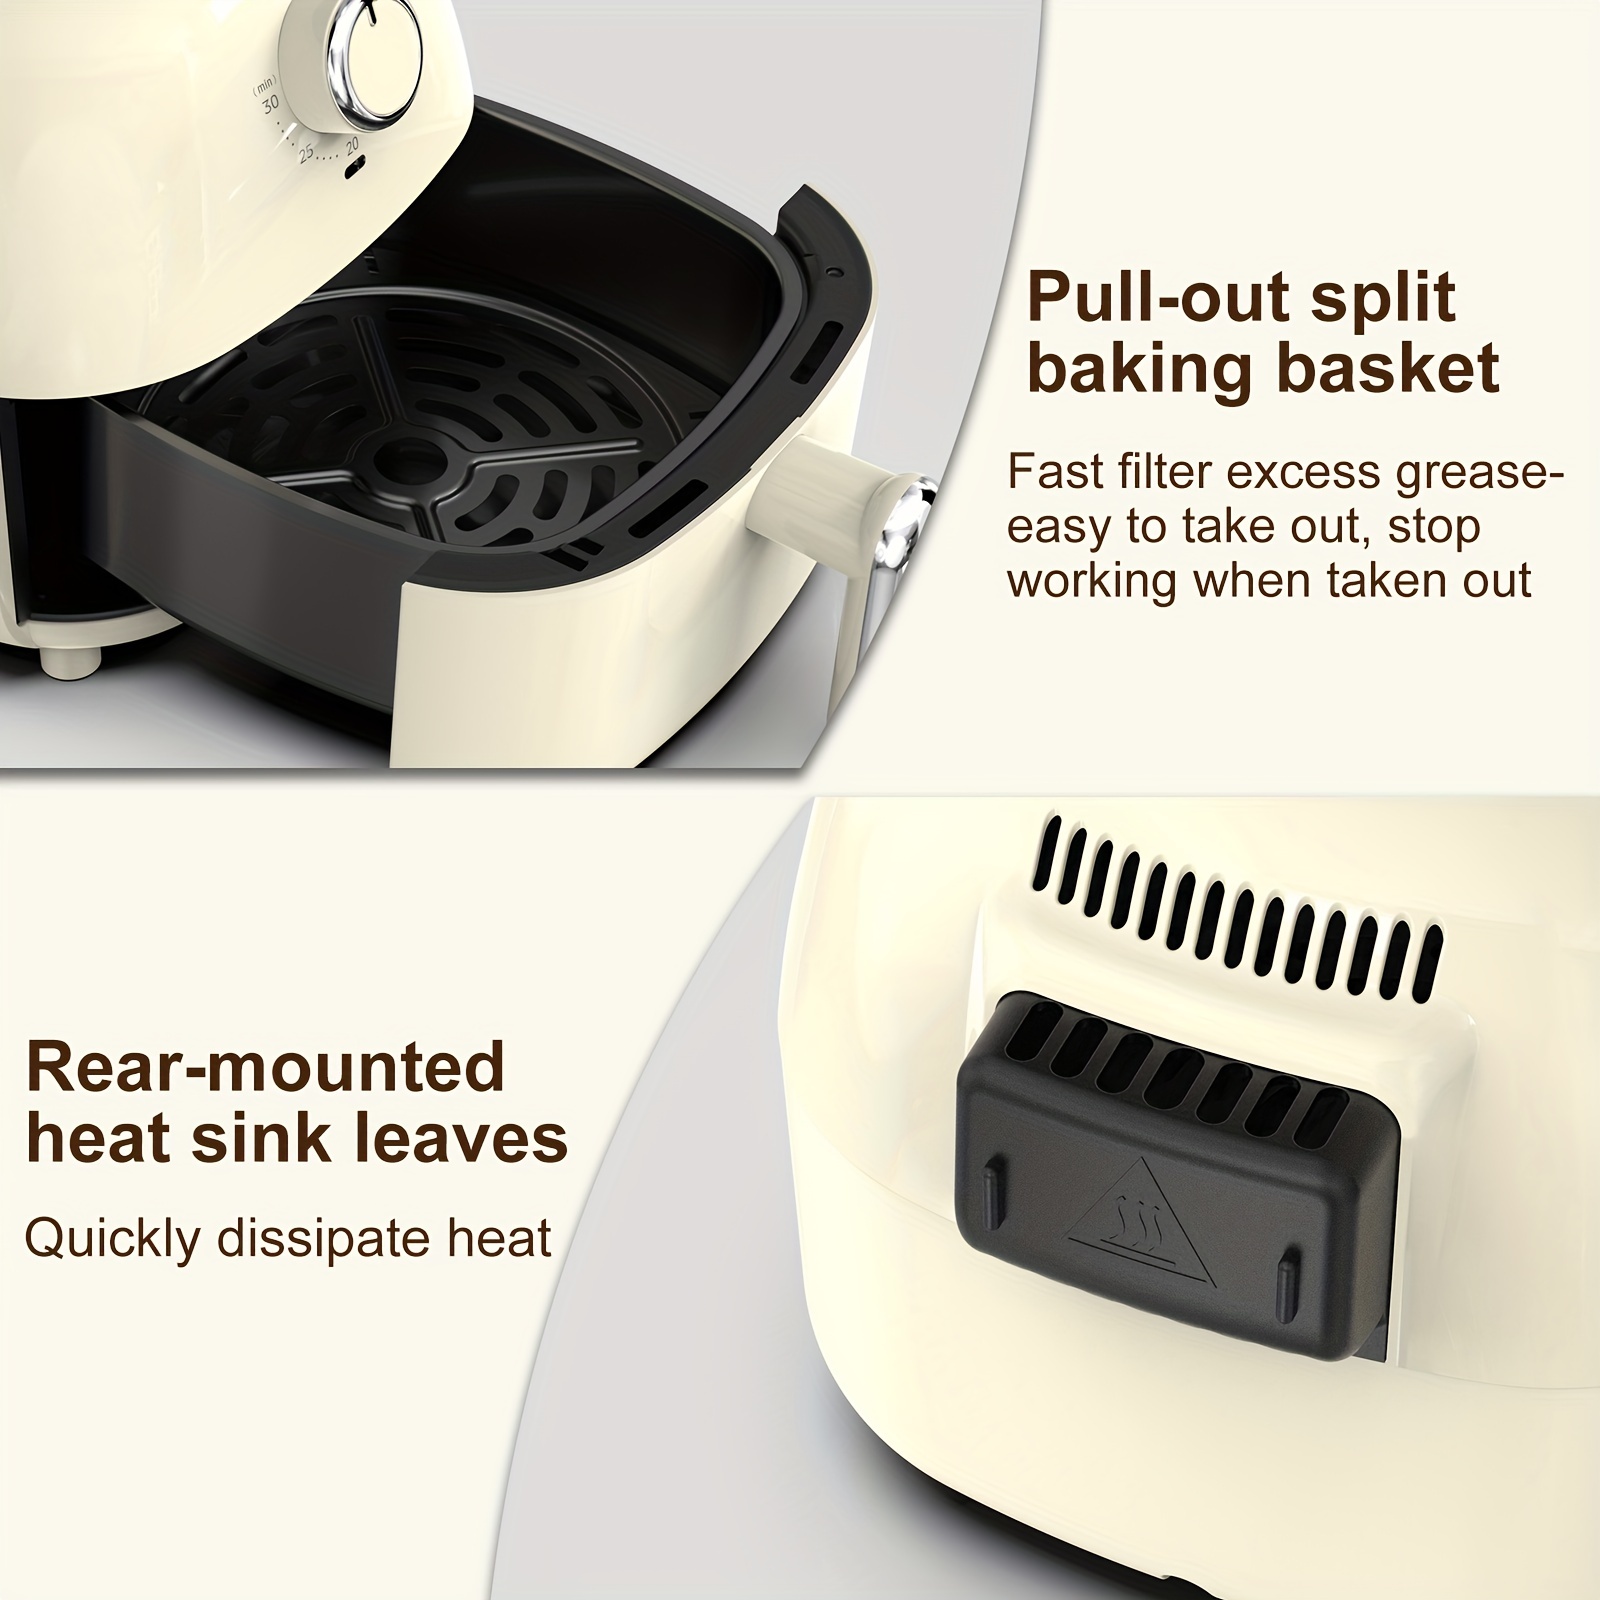 Removable Fry Basket Air Fryers at